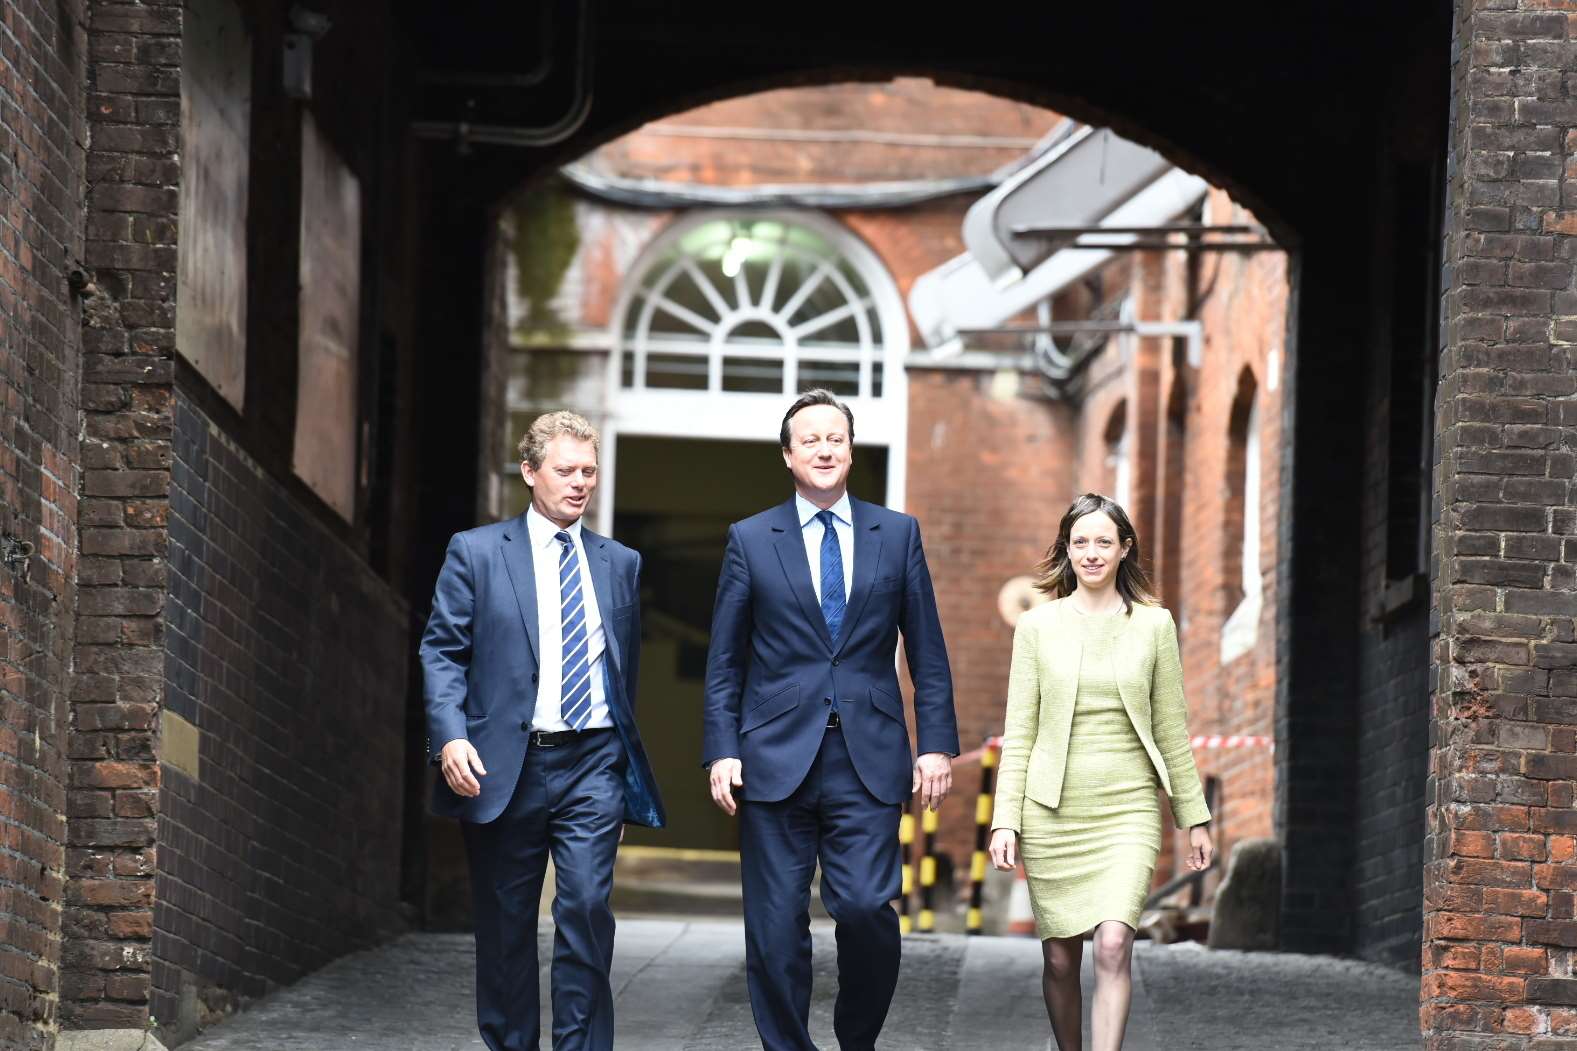 Chief executive of Shepherd Neame Jonathan Neame with Prime Minister David Cameron and Faversham MP Helen Whately in Faversham